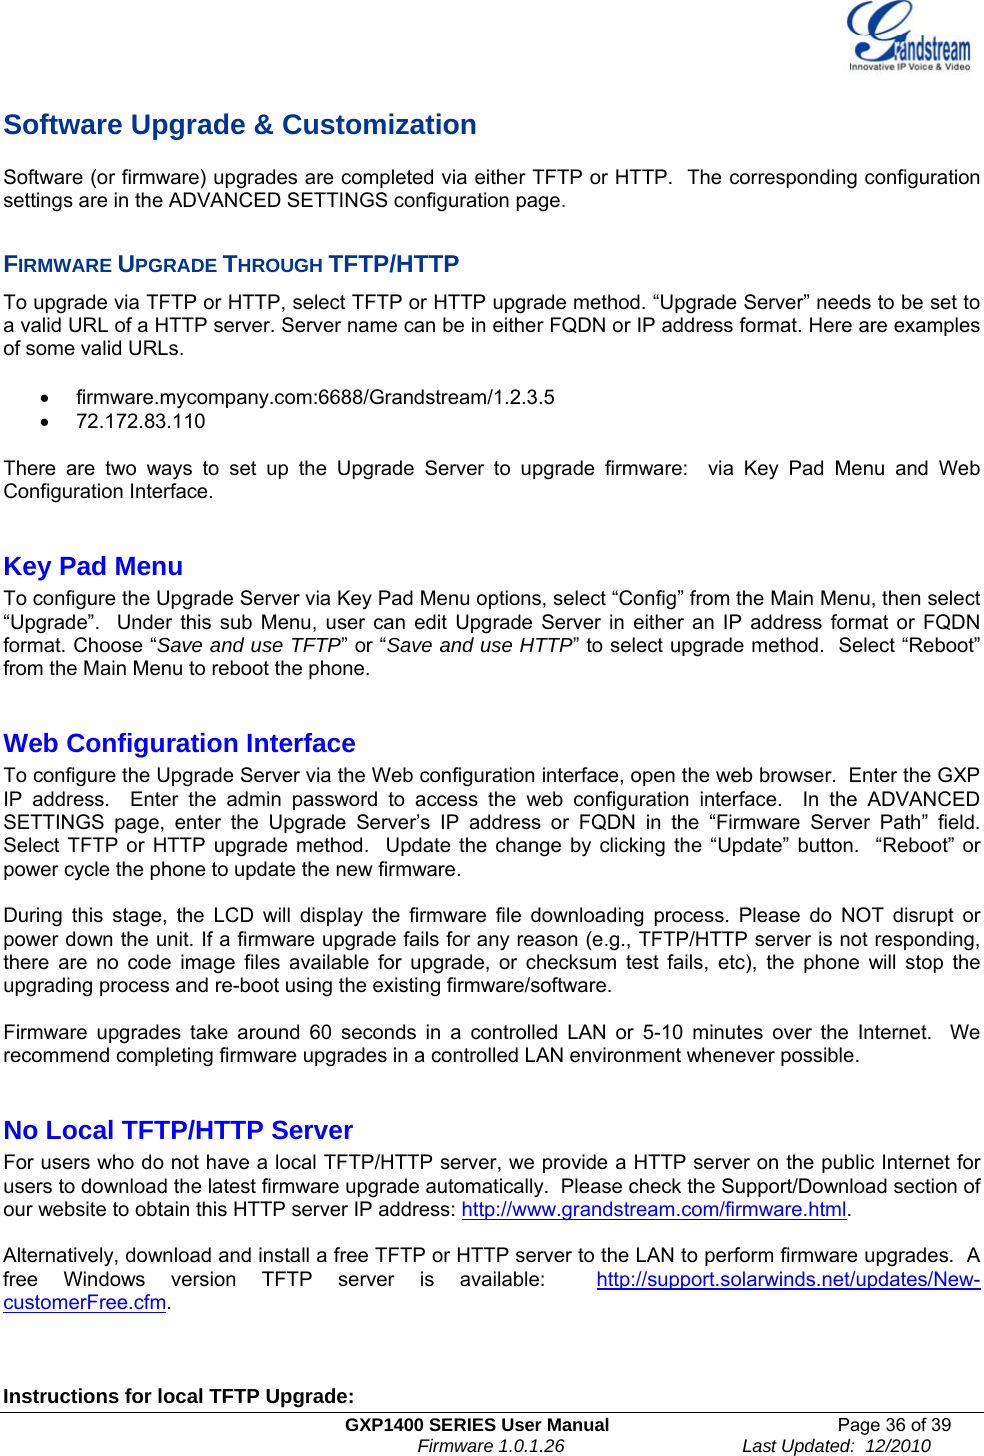   GXP1400 SERIES User Manual  Page 36 of 39                                                                          Firmware 1.0.1.26                                   Last Updated:  12/2010  Software Upgrade &amp; Customization Software (or firmware) upgrades are completed via either TFTP or HTTP.  The corresponding configuration settings are in the ADVANCED SETTINGS configuration page.   FIRMWARE UPGRADE THROUGH TFTP/HTTP To upgrade via TFTP or HTTP, select TFTP or HTTP upgrade method. “Upgrade Server” needs to be set to a valid URL of a HTTP server. Server name can be in either FQDN or IP address format. Here are examples of some valid URLs.   • firmware.mycompany.com:6688/Grandstream/1.2.3.5 • 72.172.83.110    There are two ways to set up the Upgrade Server to upgrade firmware:  via Key Pad Menu and Web Configuration Interface.  Key Pad Menu       To configure the Upgrade Server via Key Pad Menu options, select “Config” from the Main Menu, then select “Upgrade”.  Under this sub Menu, user can edit Upgrade Server in either an IP address format or FQDN format. Choose “Save and use TFTP” or “Save and use HTTP” to select upgrade method.  Select “Reboot” from the Main Menu to reboot the phone.  Web Configuration Interface To configure the Upgrade Server via the Web configuration interface, open the web browser.  Enter the GXP IP address.  Enter the admin password to access the web configuration interface.  In the ADVANCED SETTINGS page, enter the Upgrade Server’s IP address or FQDN in the “Firmware Server Path” field.  Select TFTP or HTTP upgrade method.  Update the change by clicking the “Update” button.  “Reboot” or power cycle the phone to update the new firmware.    During this stage, the LCD will display the firmware file downloading process. Please do NOT disrupt or power down the unit. If a firmware upgrade fails for any reason (e.g., TFTP/HTTP server is not responding, there are no code image files available for upgrade, or checksum test fails, etc), the phone will stop the upgrading process and re-boot using the existing firmware/software.  Firmware upgrades take around 60 seconds in a controlled LAN or 5-10 minutes over the Internet.  We recommend completing firmware upgrades in a controlled LAN environment whenever possible.   No Local TFTP/HTTP Server For users who do not have a local TFTP/HTTP server, we provide a HTTP server on the public Internet for users to download the latest firmware upgrade automatically.  Please check the Support/Download section of our website to obtain this HTTP server IP address: http://www.grandstream.com/firmware.html.    Alternatively, download and install a free TFTP or HTTP server to the LAN to perform firmware upgrades.  A free Windows version TFTP server is available:  http://support.solarwinds.net/updates/New-customerFree.cfm.       Instructions for local TFTP Upgrade: 